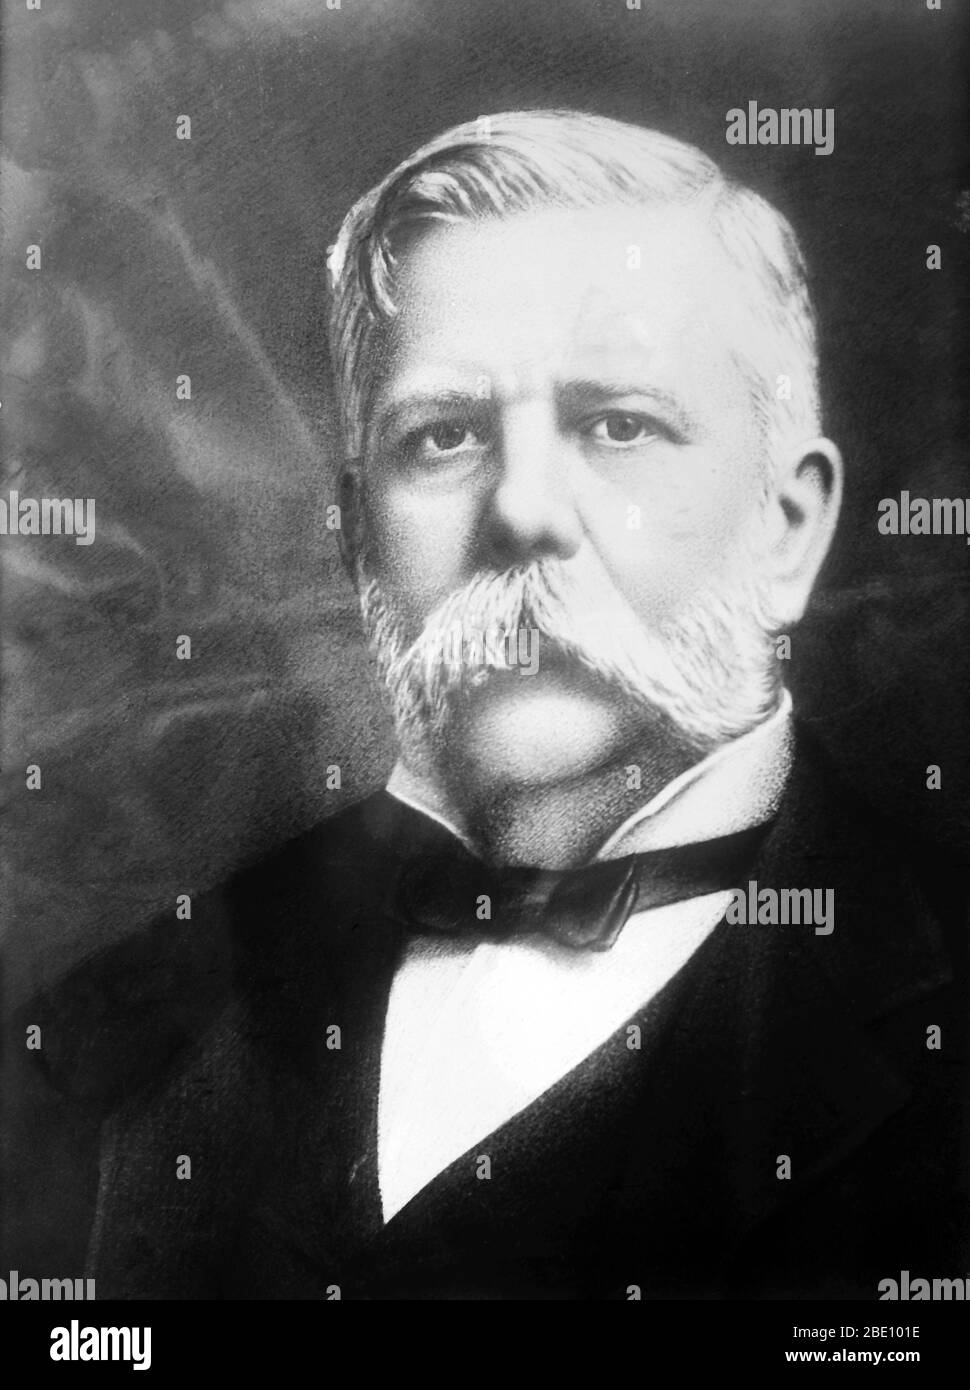 George Westinghouse, Jr. (October 6, 1846 - March 12, 1914) was an American entrepreneur and engineer who invented the railway air brake and was a pioneer of the electrical industry. Westinghouse was one of Edison's main rivals in the early implementation of the American electricity system. Westinghouse's system ultimately prevailed over Edison's insistence on direct current. In 1893, the Westinghouse company was awarded the contract to set up an AC network to power the World's Columbian Exposition in Chicago, giving the company and the technology widespread positive publicity. He also receive Stock Photo